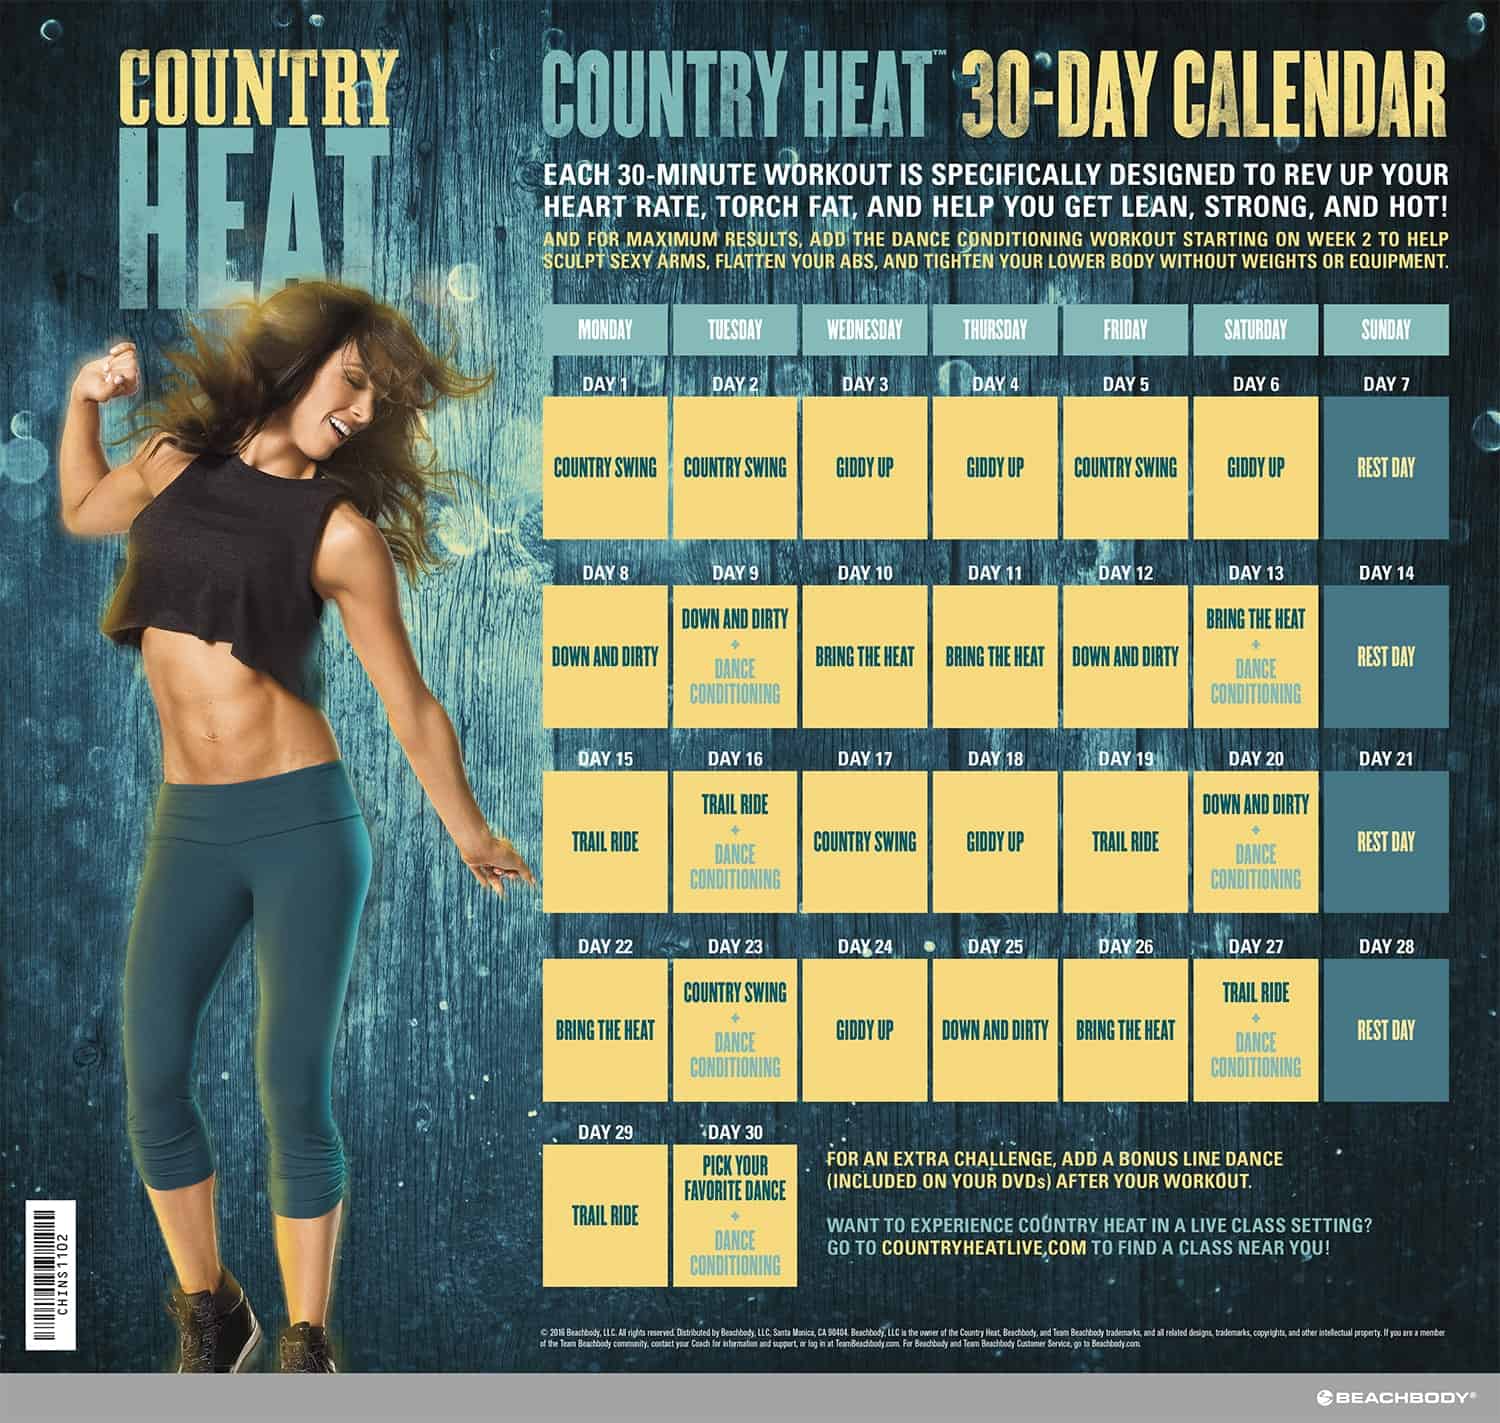 Seriously Honest Country Heat Review Fun Workout to Lose Weight?